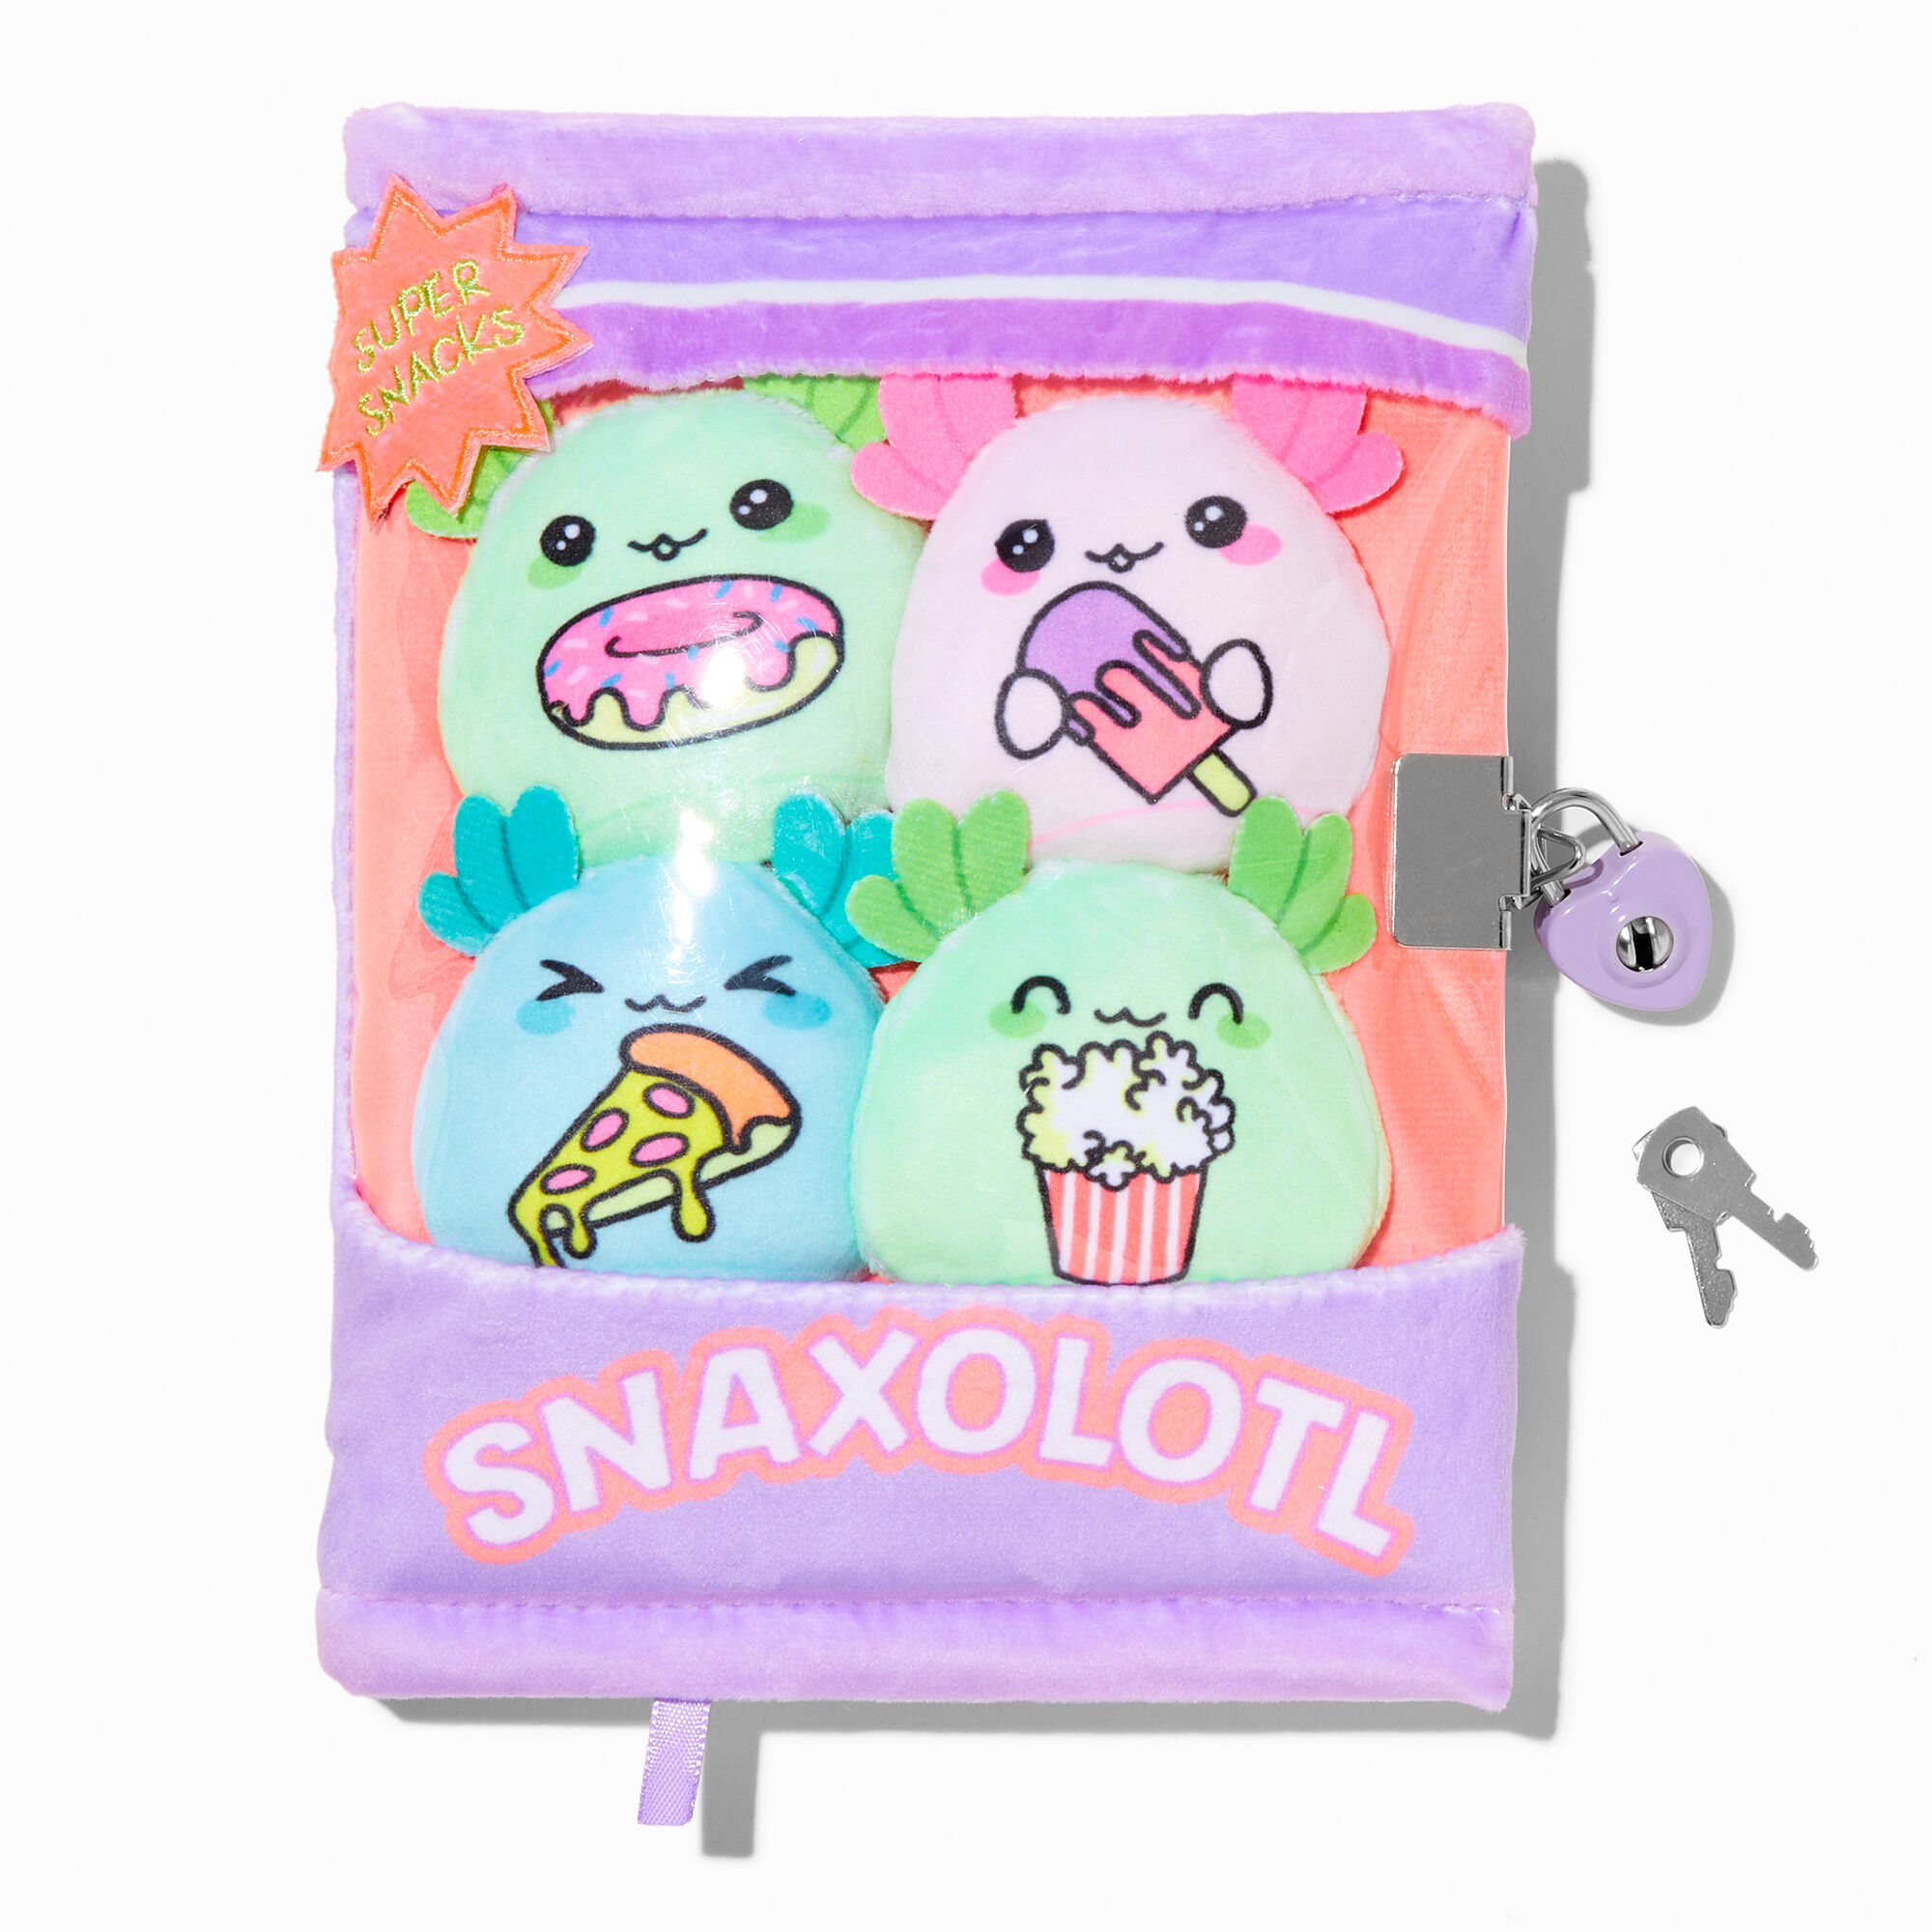 View Claires Snaxolotl Lock Diary information